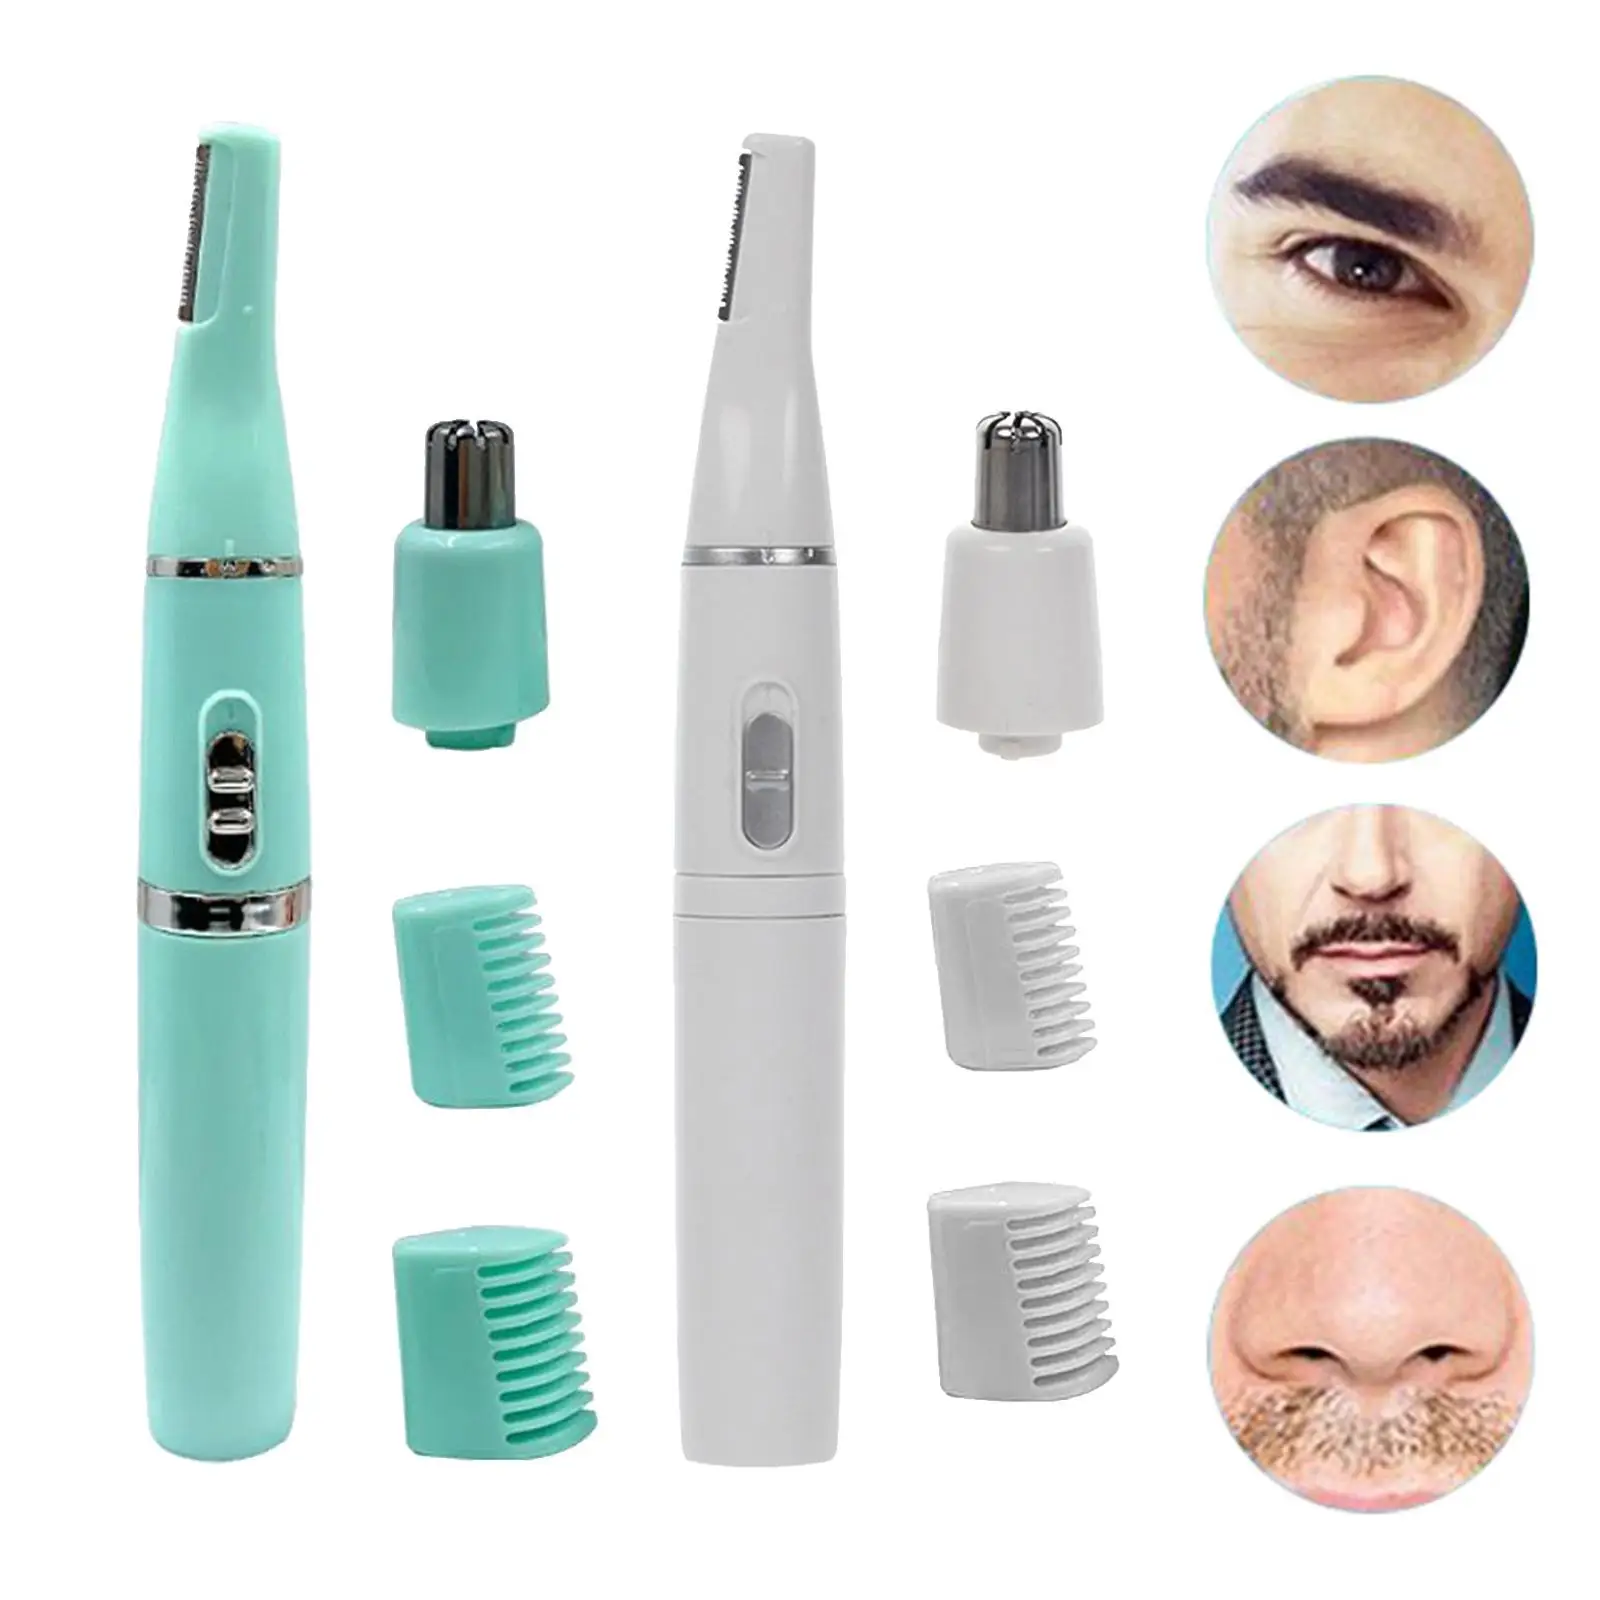 Eyebrow Trimmer 2 in 1 Stainless Steel Washable Easy to Clean Clipper Blades Multipurpose Portable for Household Remover Men